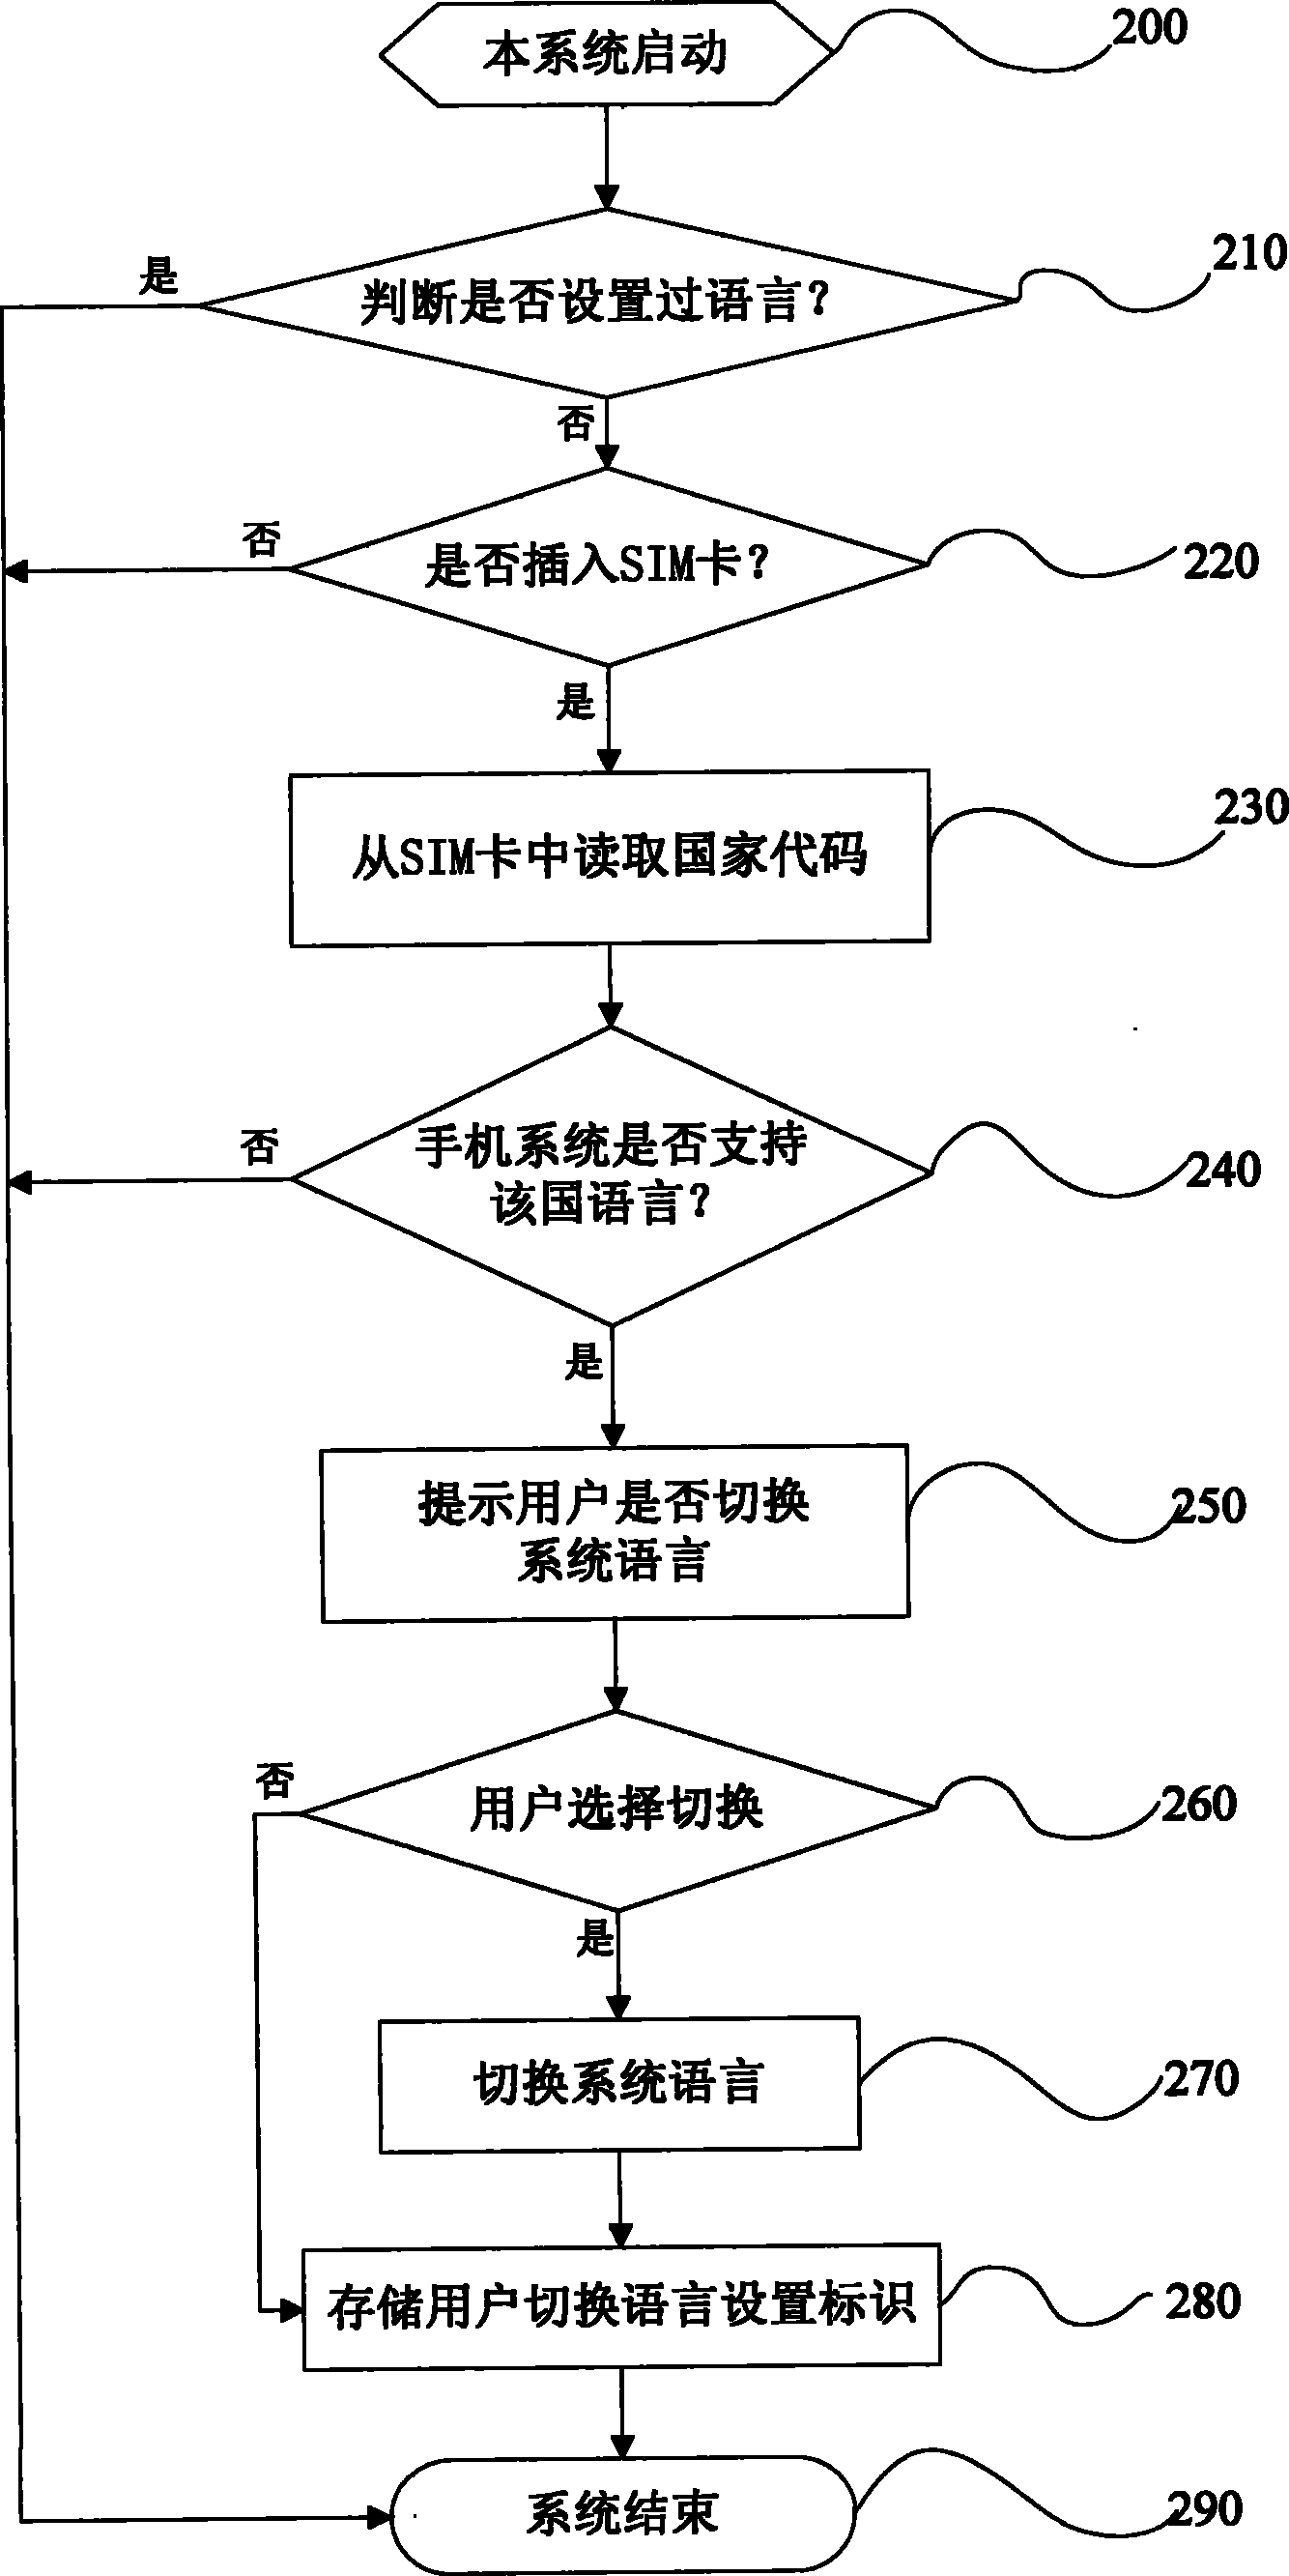 System and method for automatically switching interface language of mobile terminal